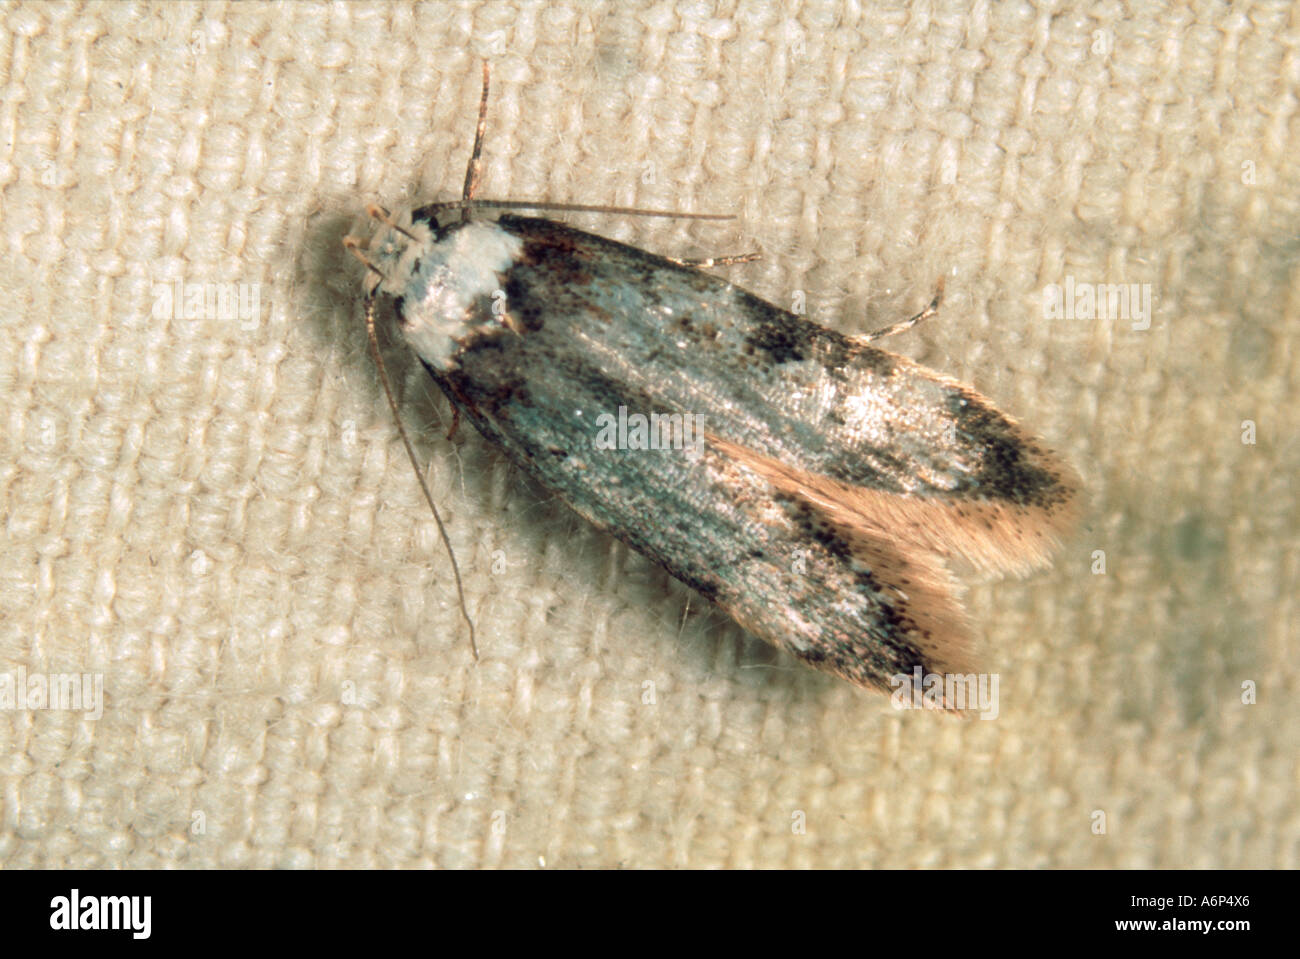 White shouldered house moth Endrosis sarcitrella moth house pest Stock Photo